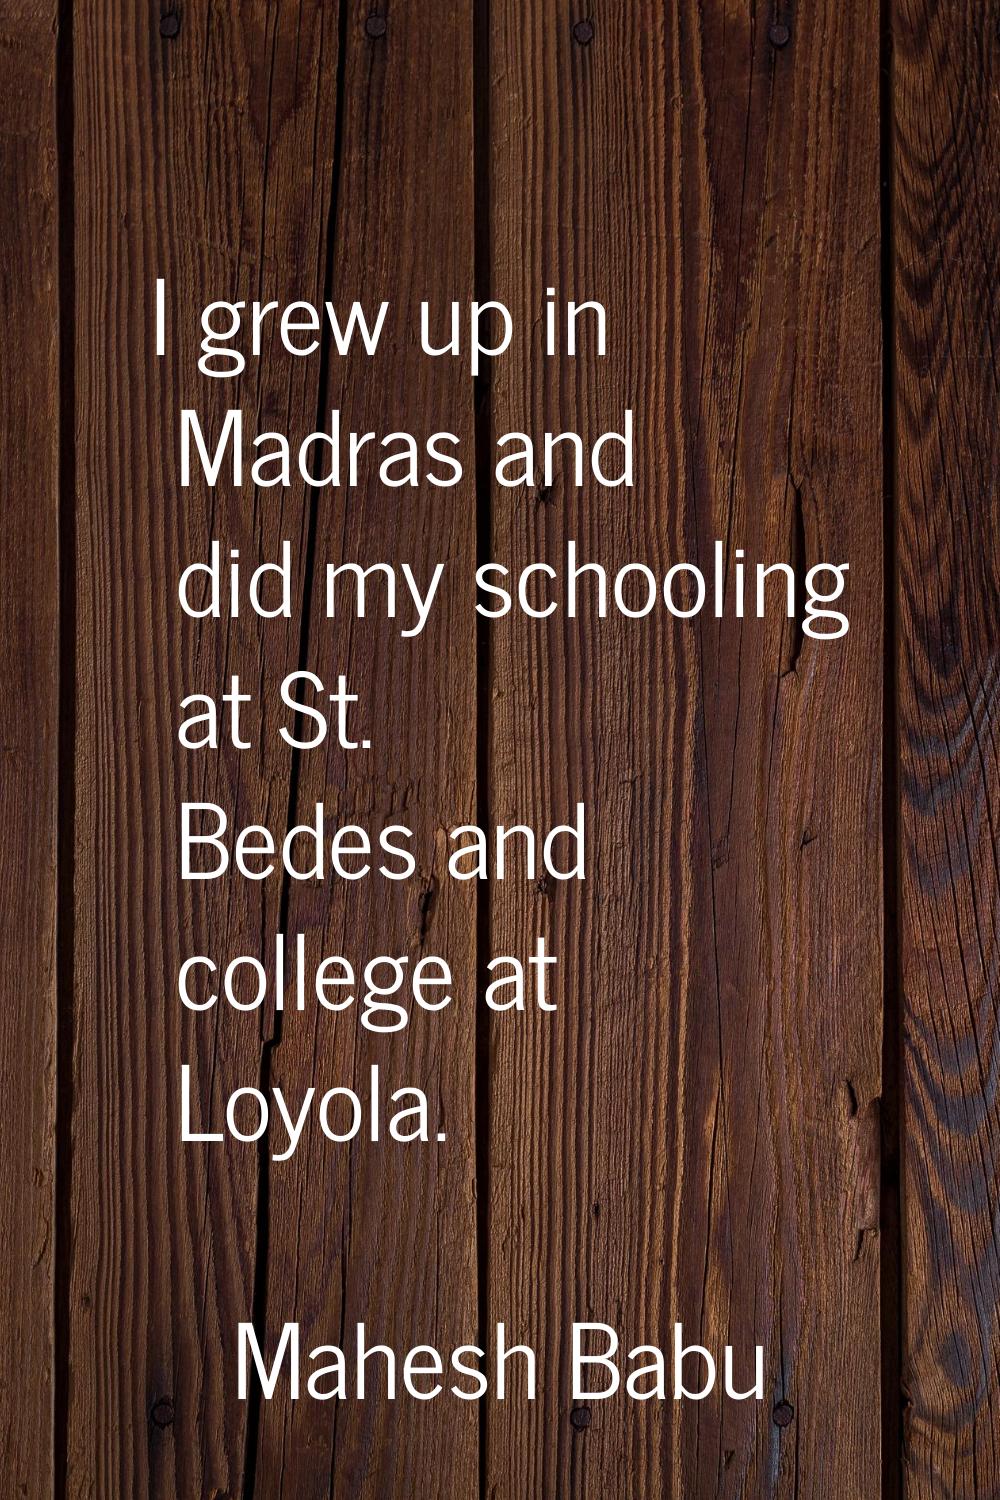 I grew up in Madras and did my schooling at St. Bedes and college at Loyola.